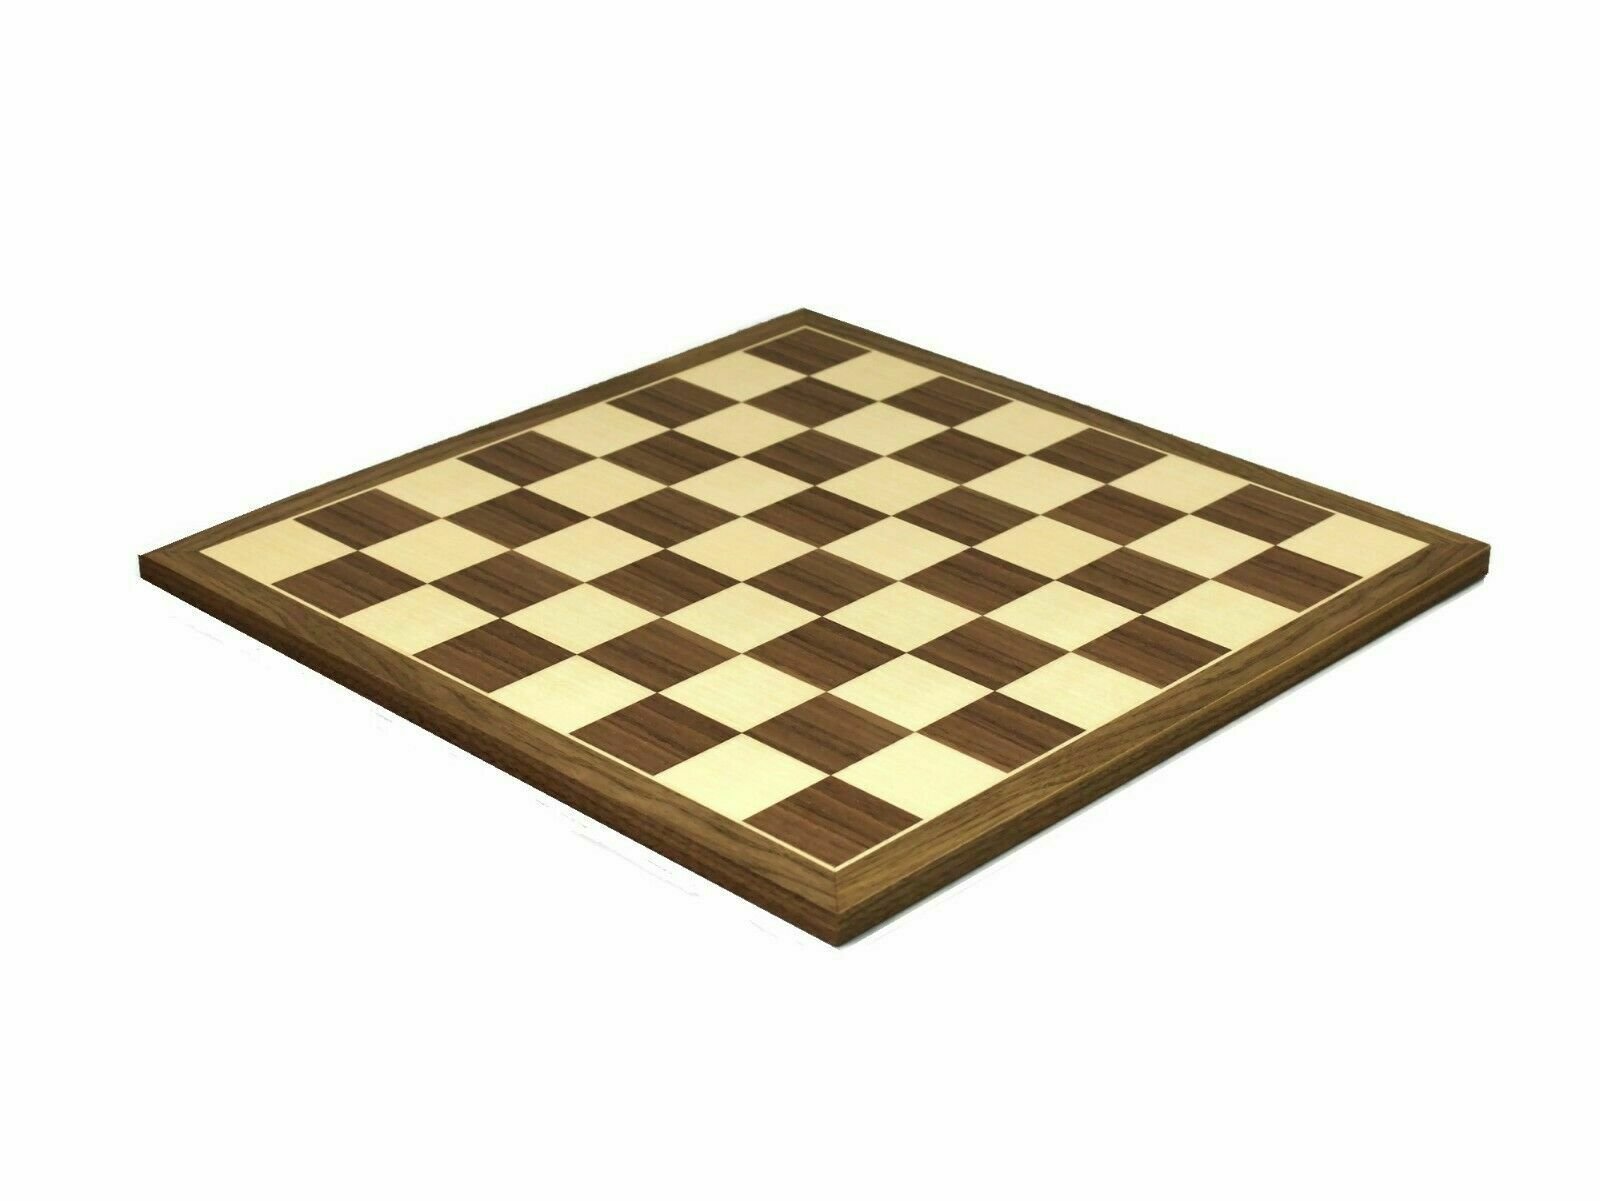 Master Chess - Conquer the Chessboard on